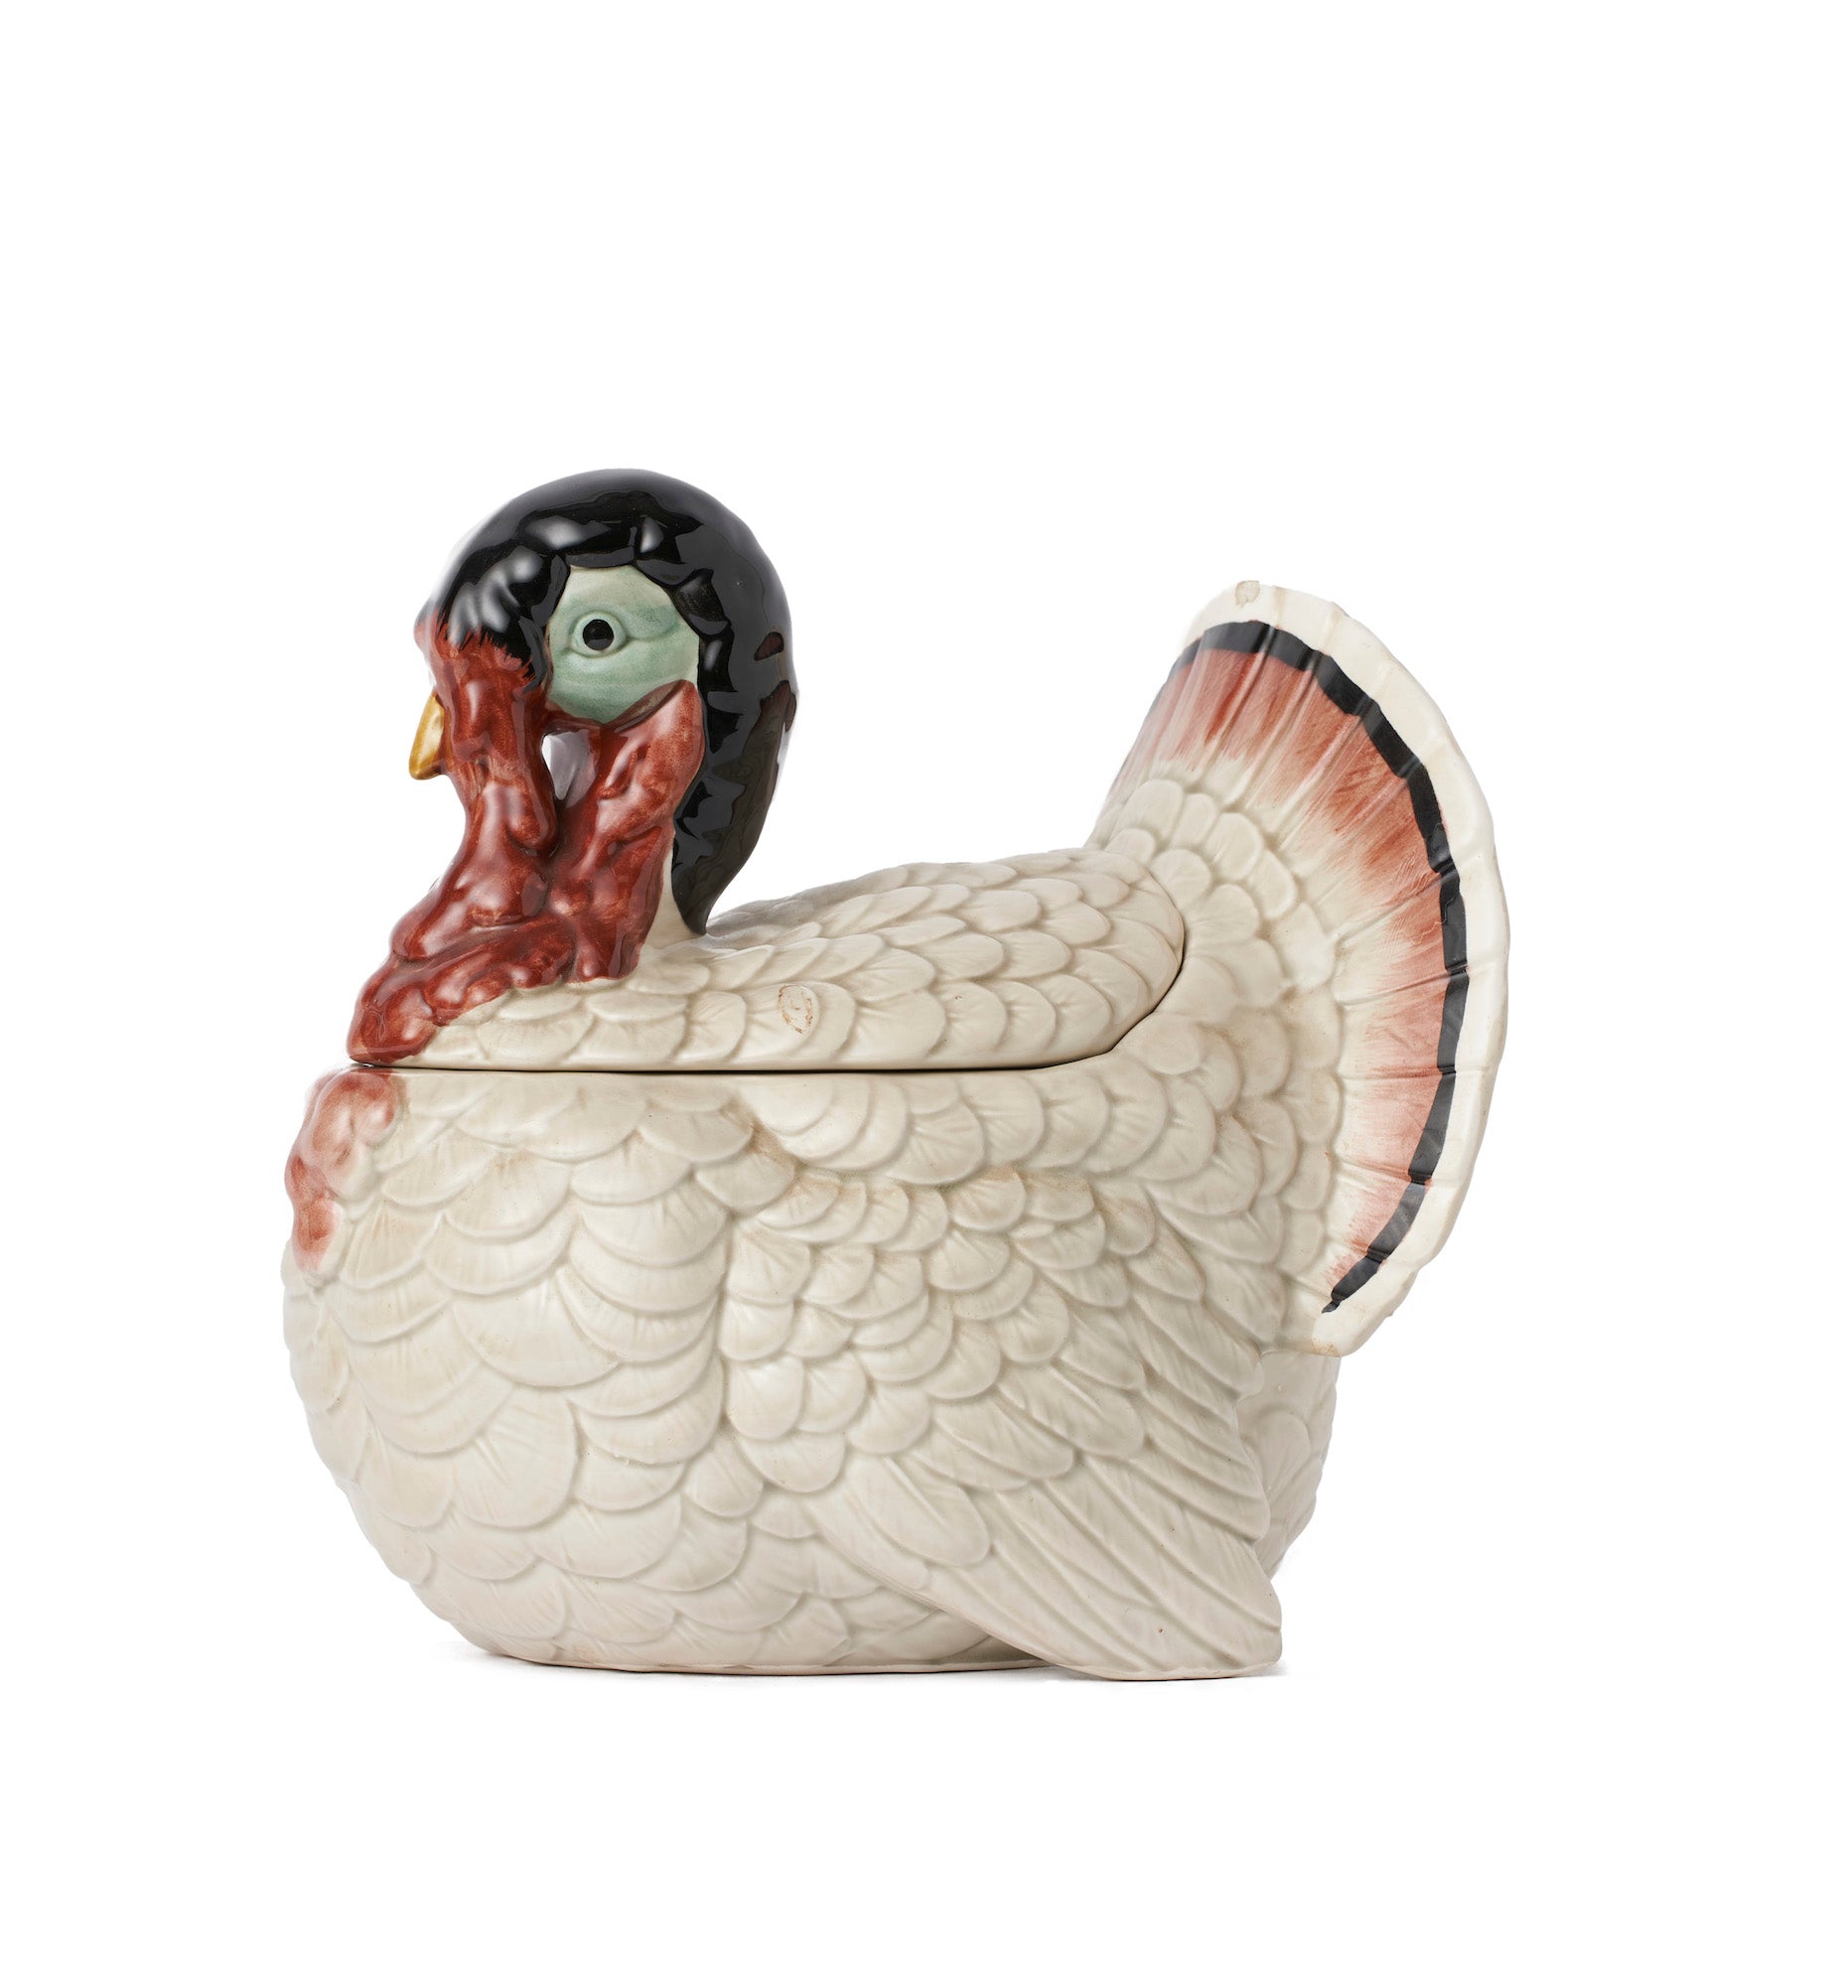 SOLD A ceramic lidded tureen in the form of a turkey, French Circa 1940